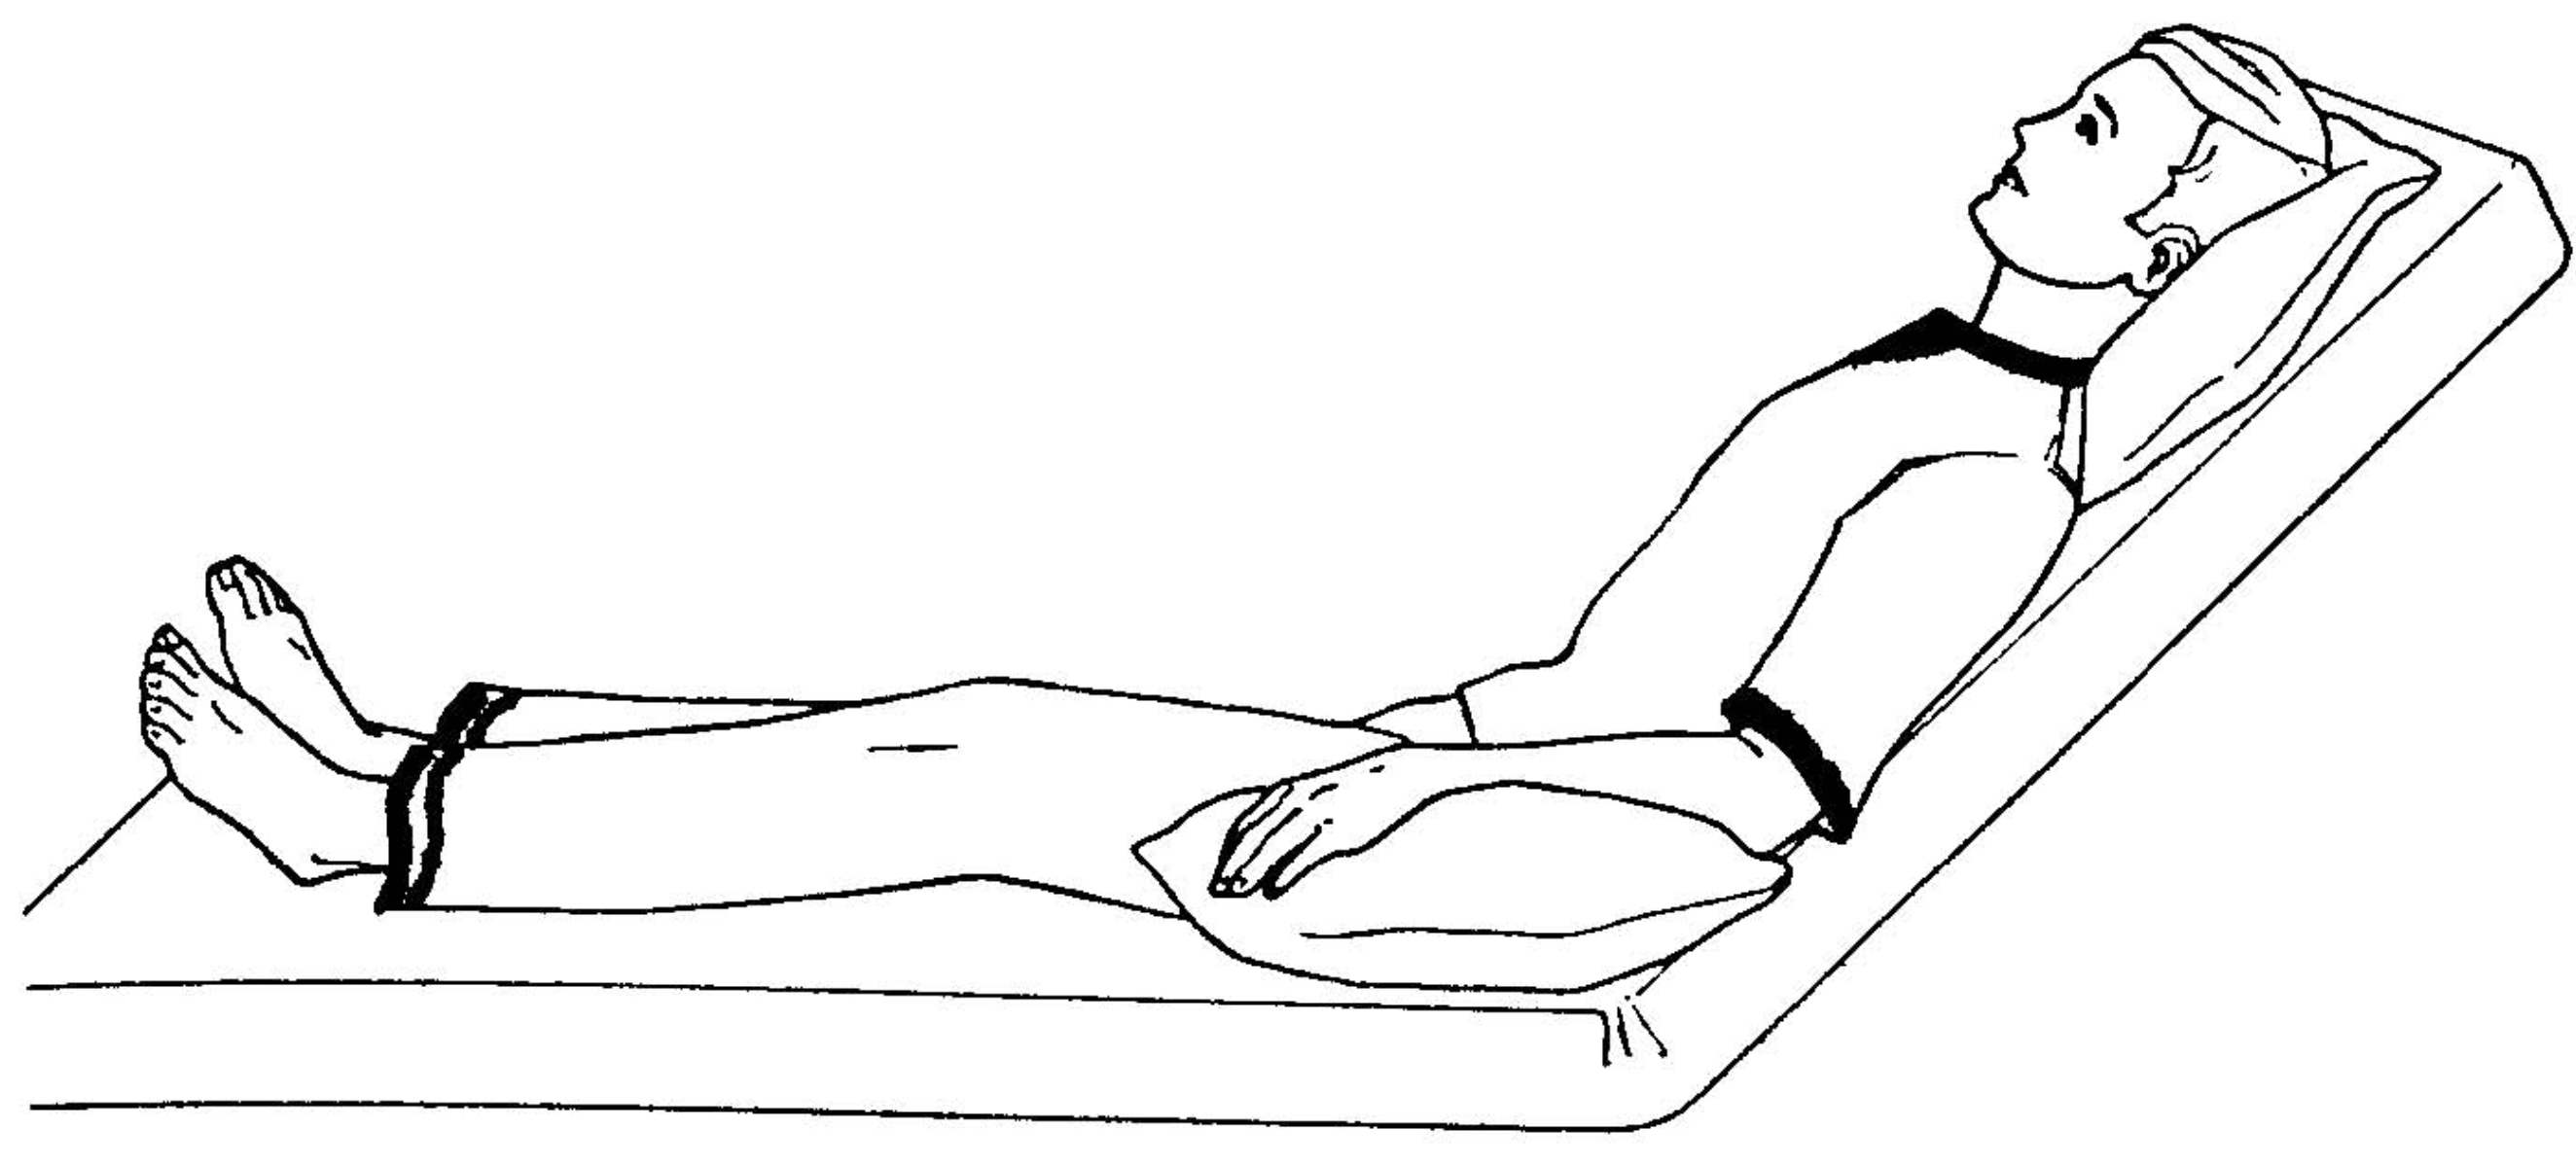 Prone Position: Definition, Benefits, and Process Explained